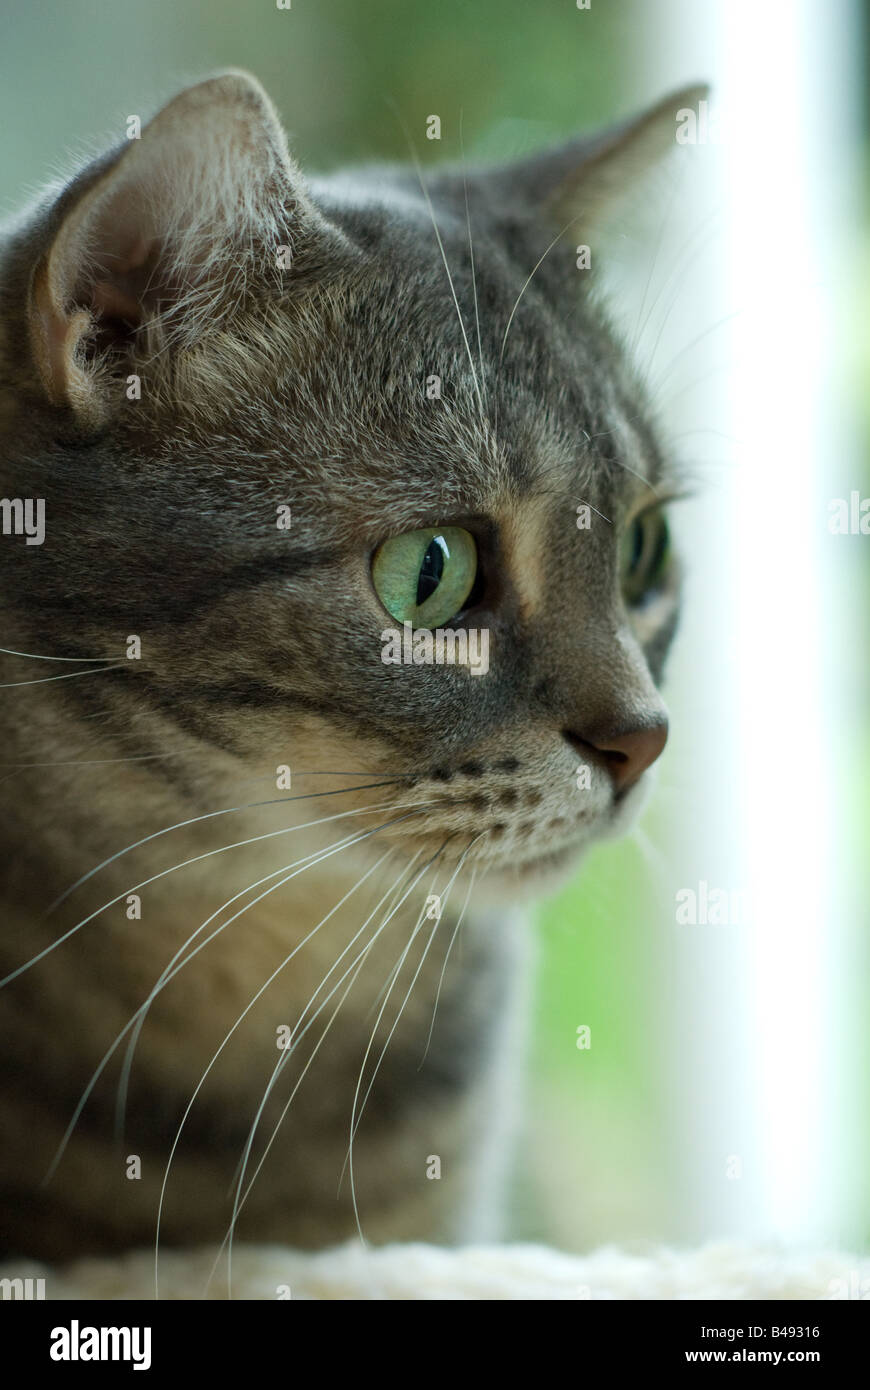 This American Shorthair cat looks alertly at something moving in the distance Stock Photo